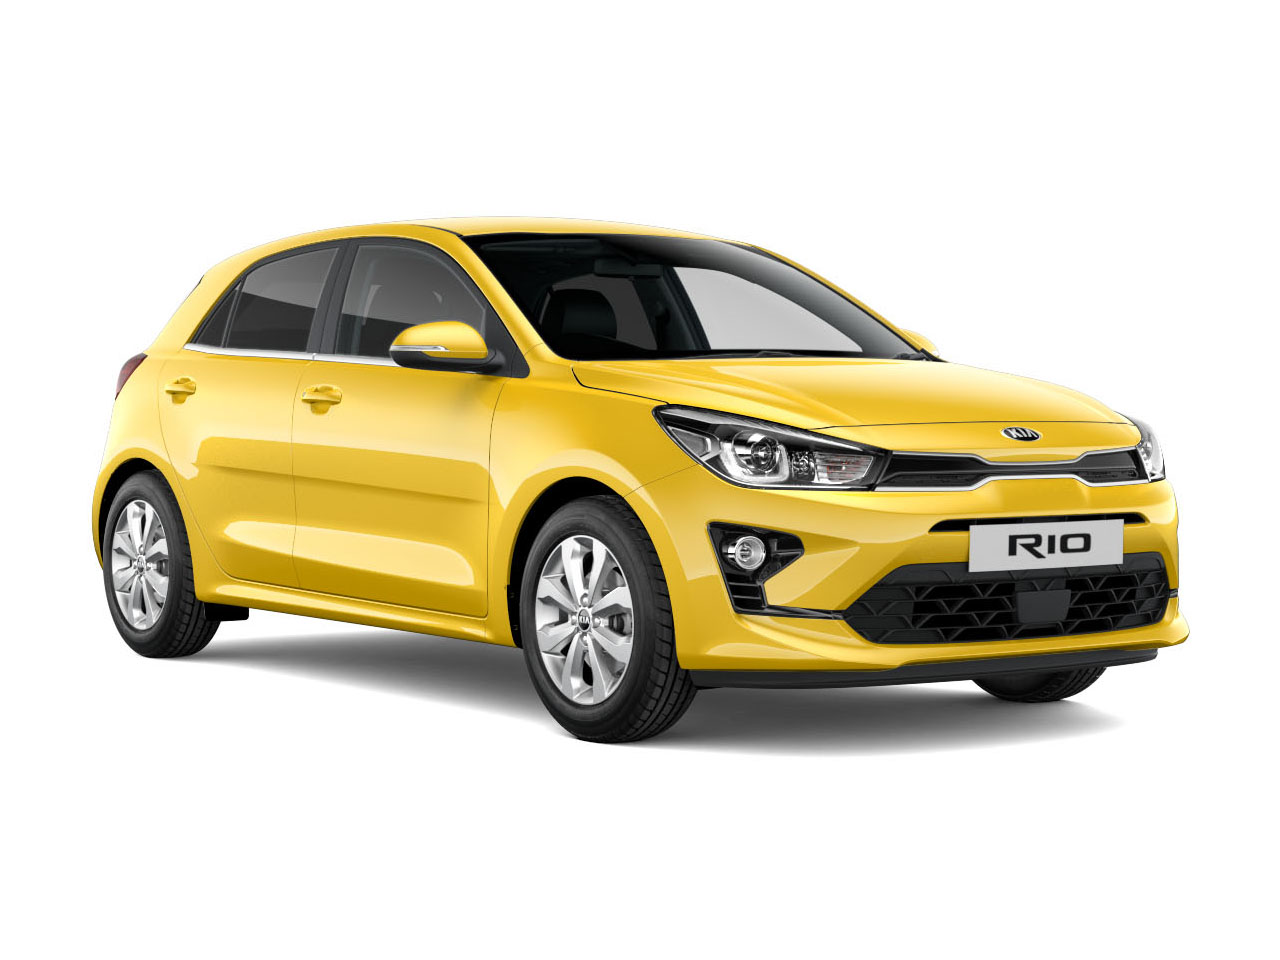 Kia Rio orders closed in Australia more than 500 to be delivered  Drive